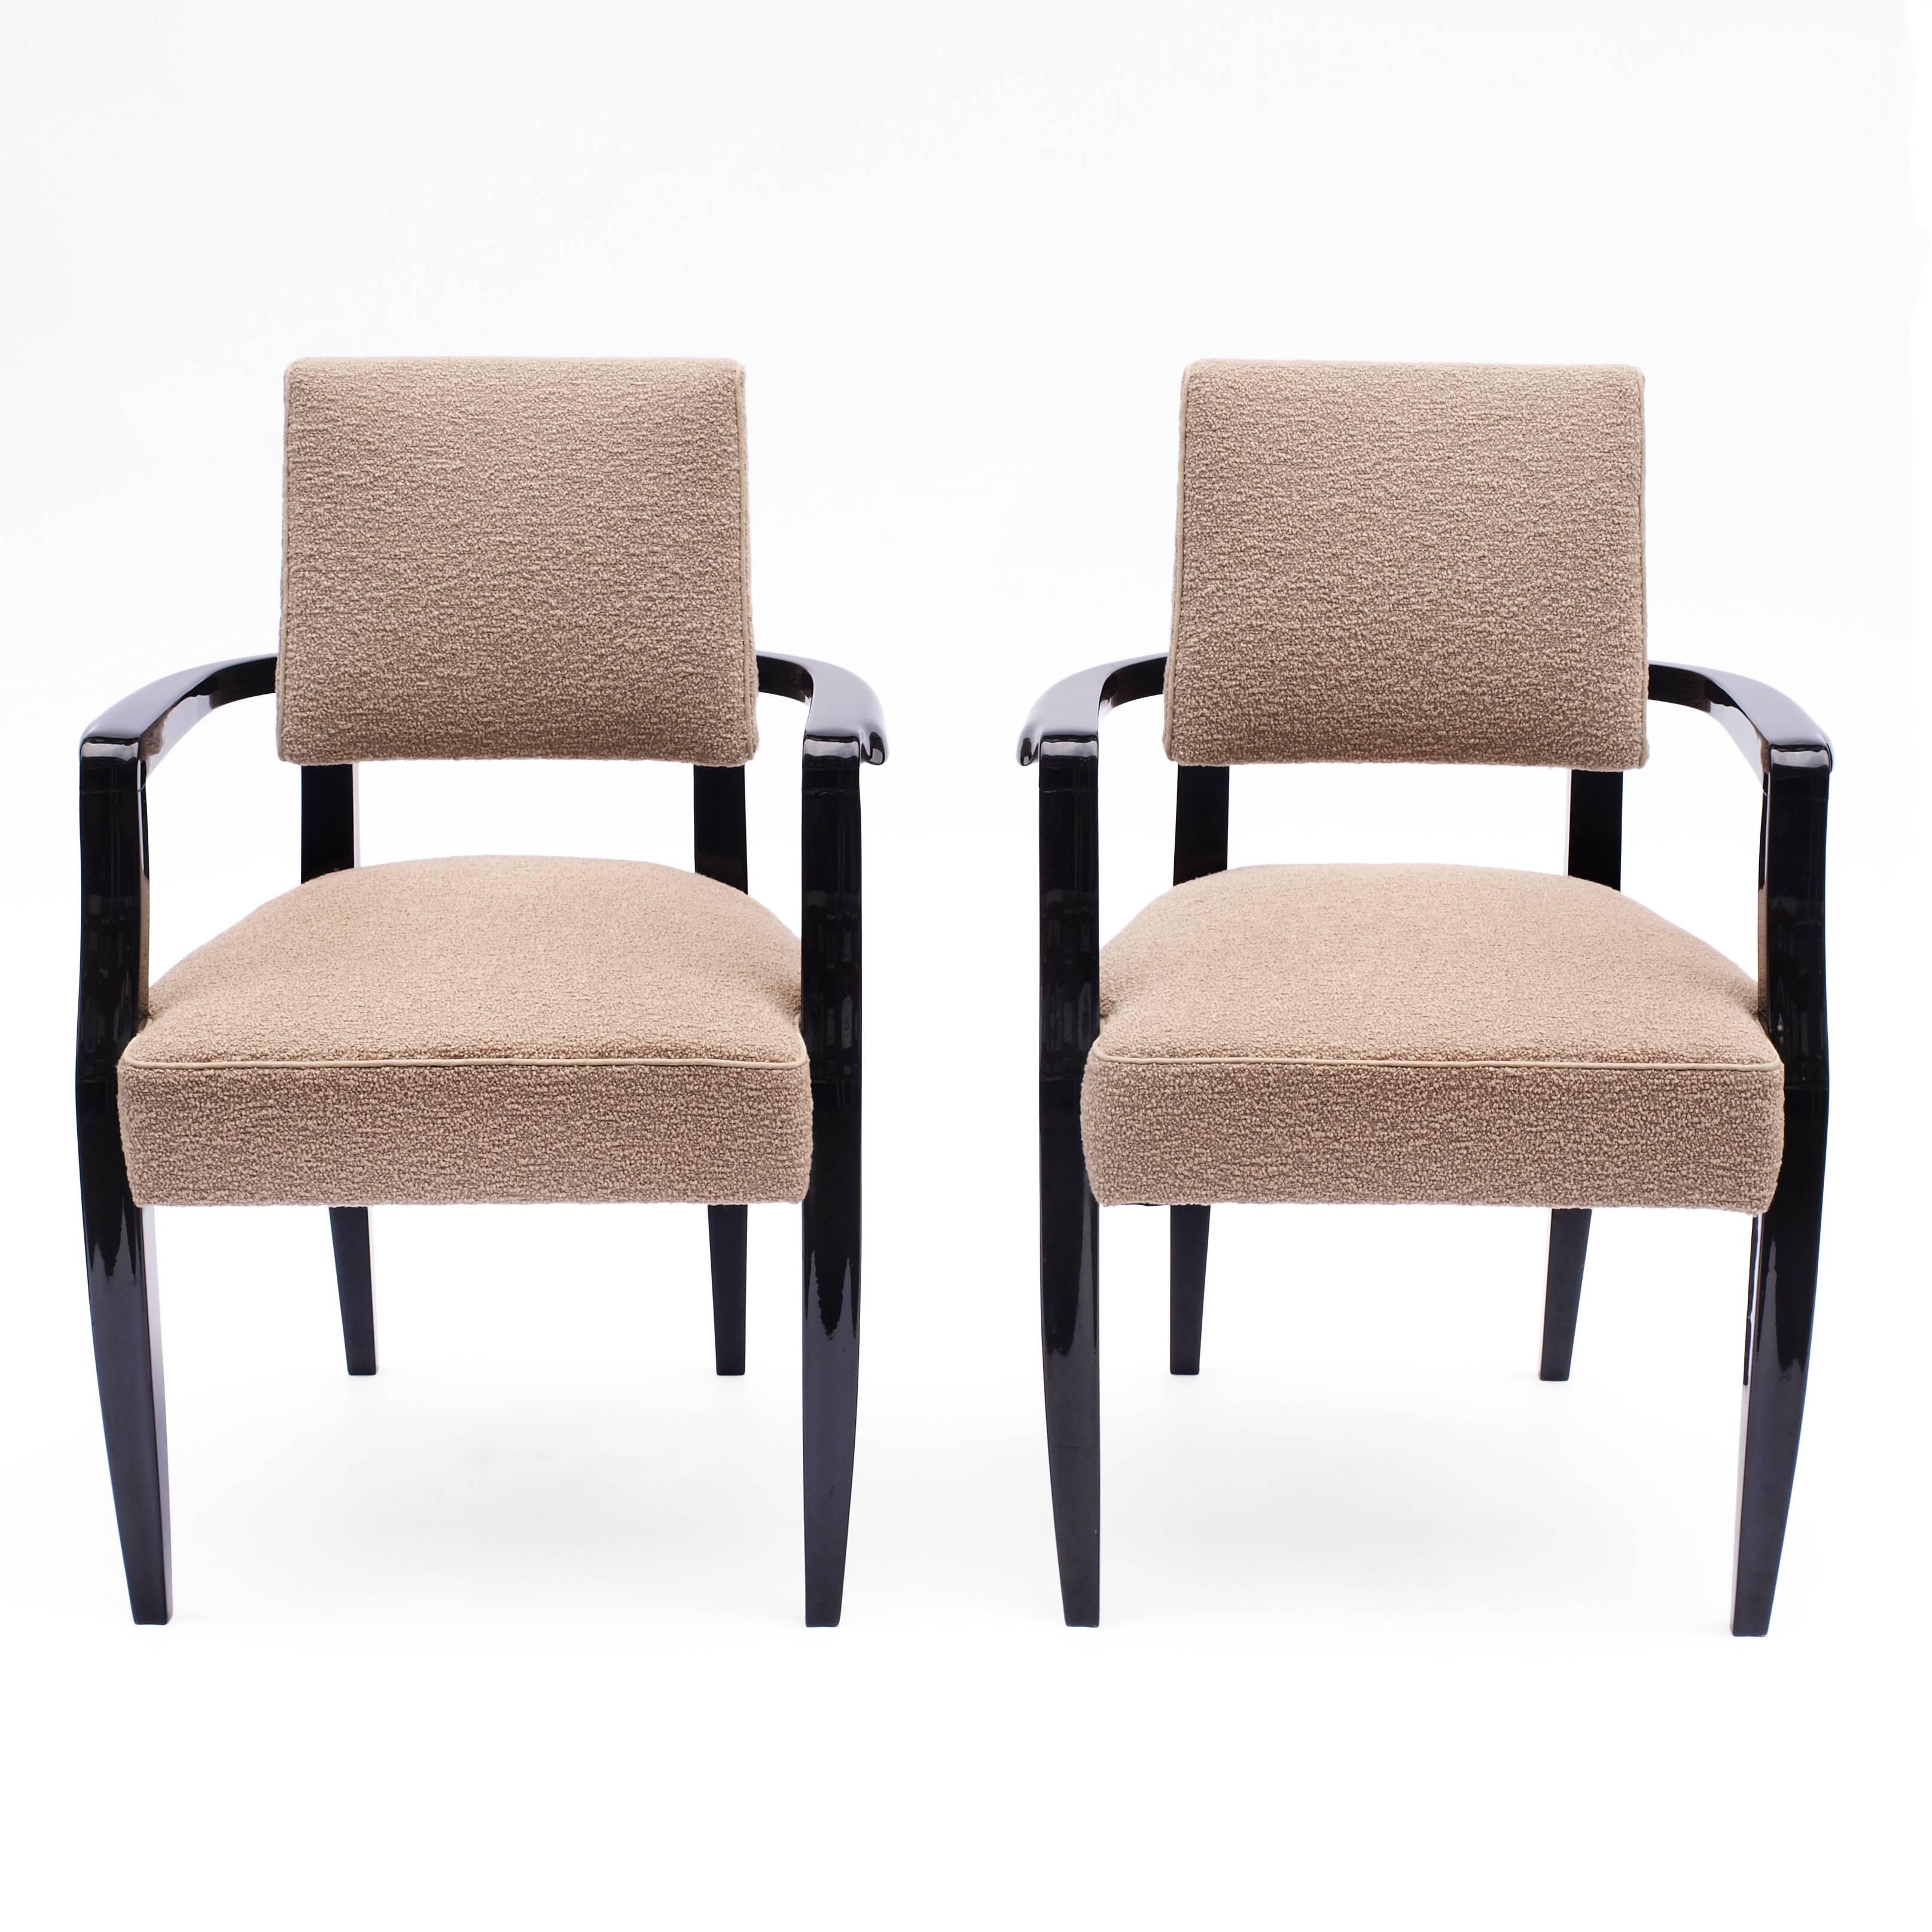 A pair of 1940s French bridge chairs with black lacquer frames, newly upholstered in taupe wool with matching custom piping. Fabric by Bute.
Provenance: From the collection of Paul Lombard.